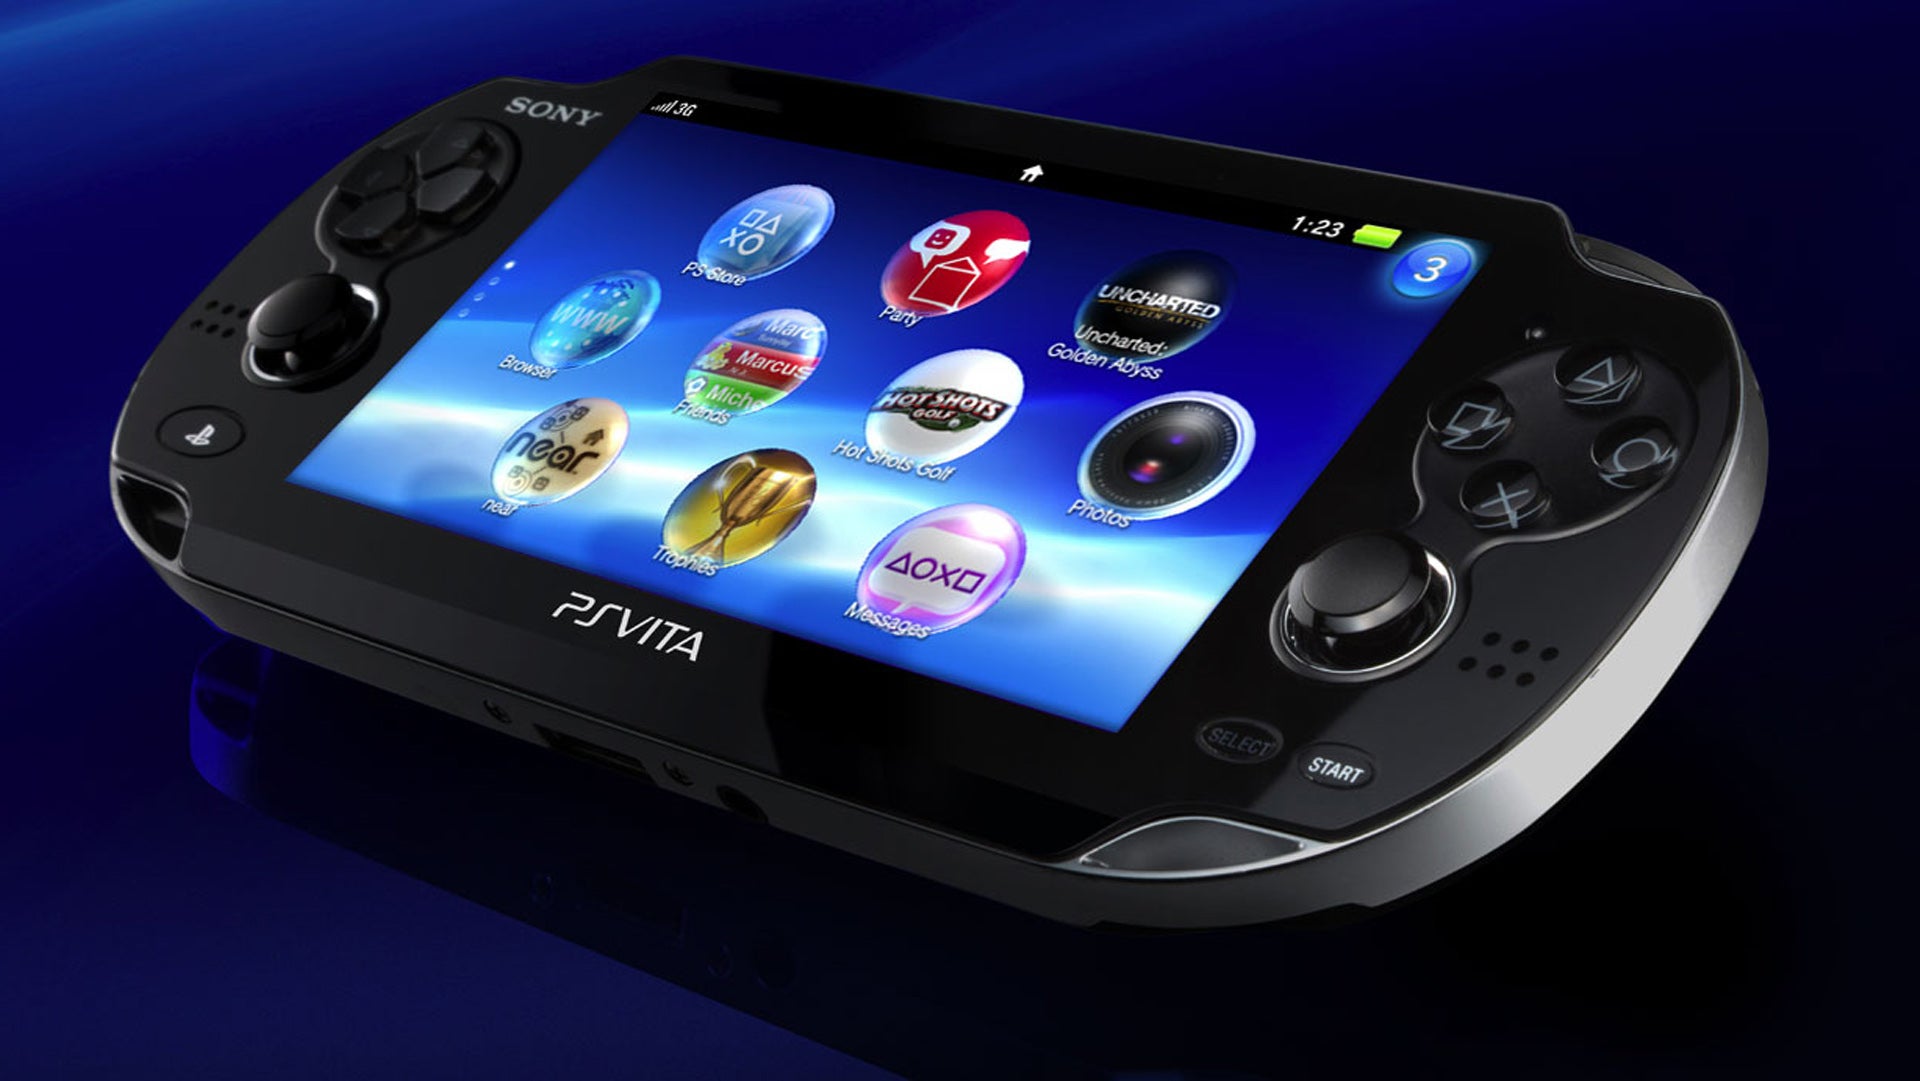 Image for PlayStation Vita systems have sold over 4 million units in Japan